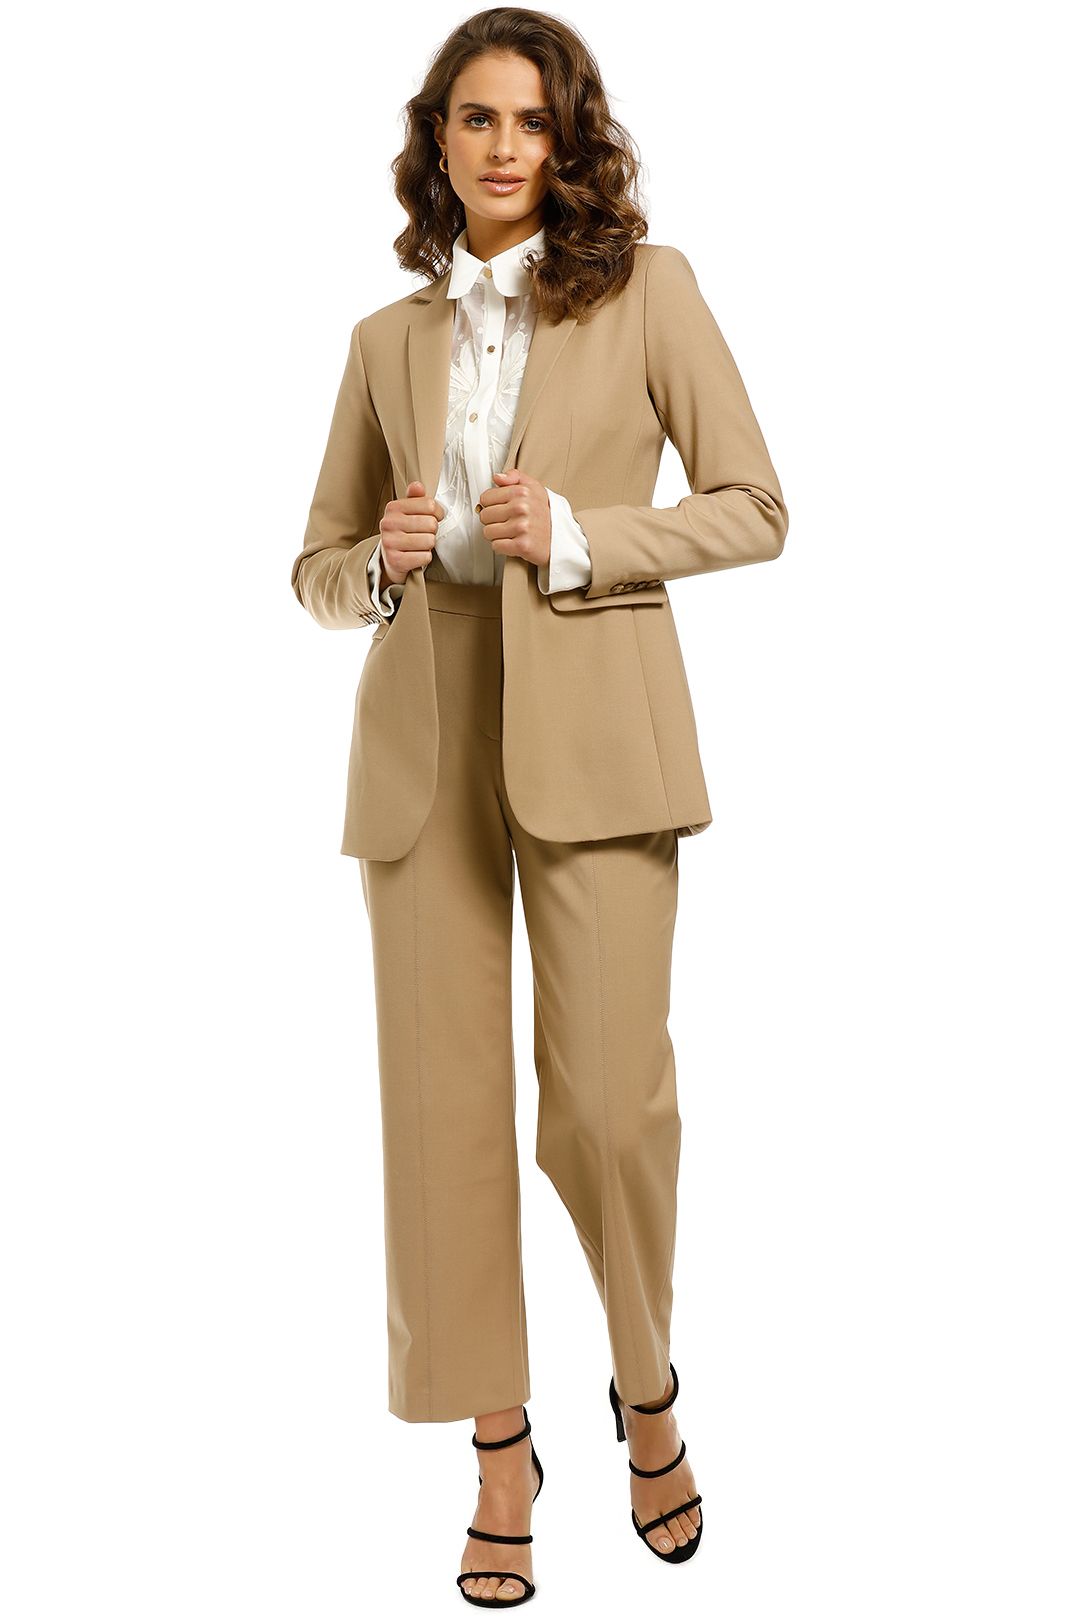 Whistles-Sonia-Single-Breasted-Jacket-and-Pant-Set-Camel-Front